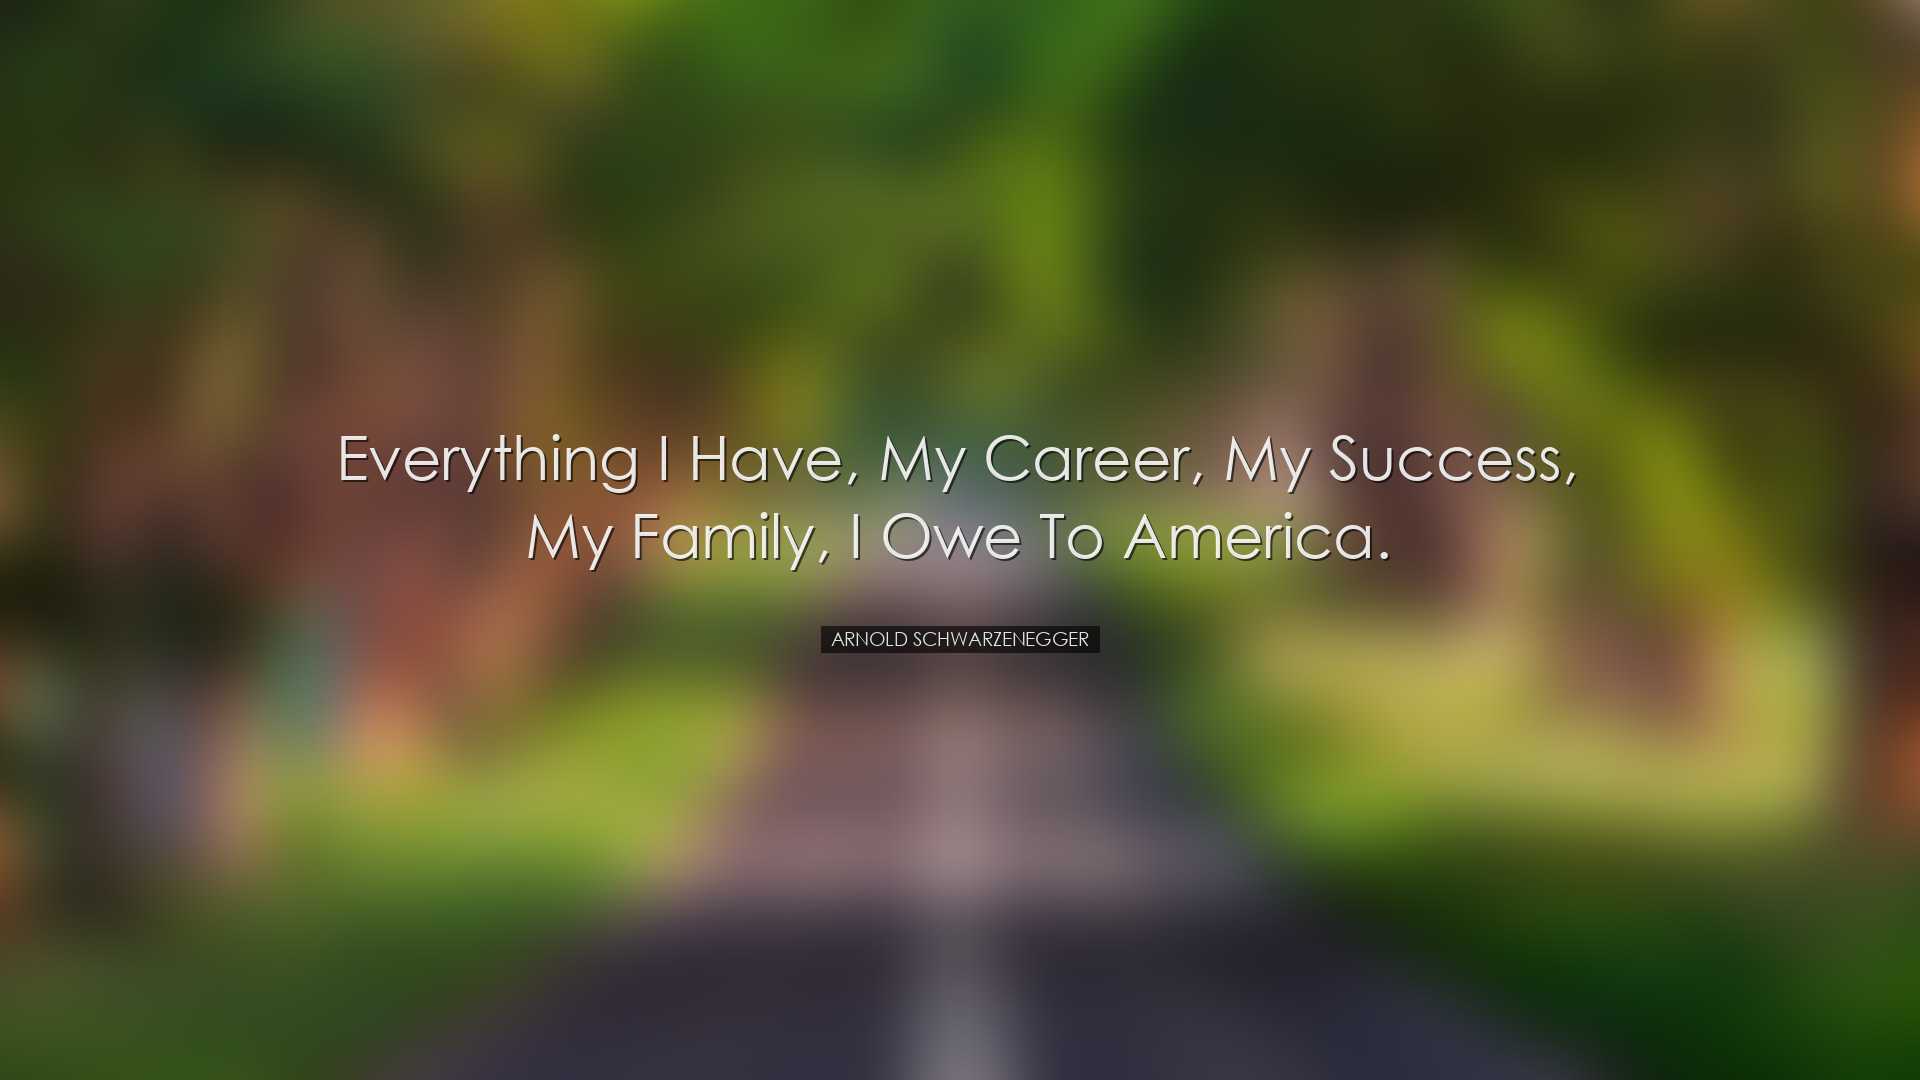 Everything I have, my career, my success, my family, I owe to Amer